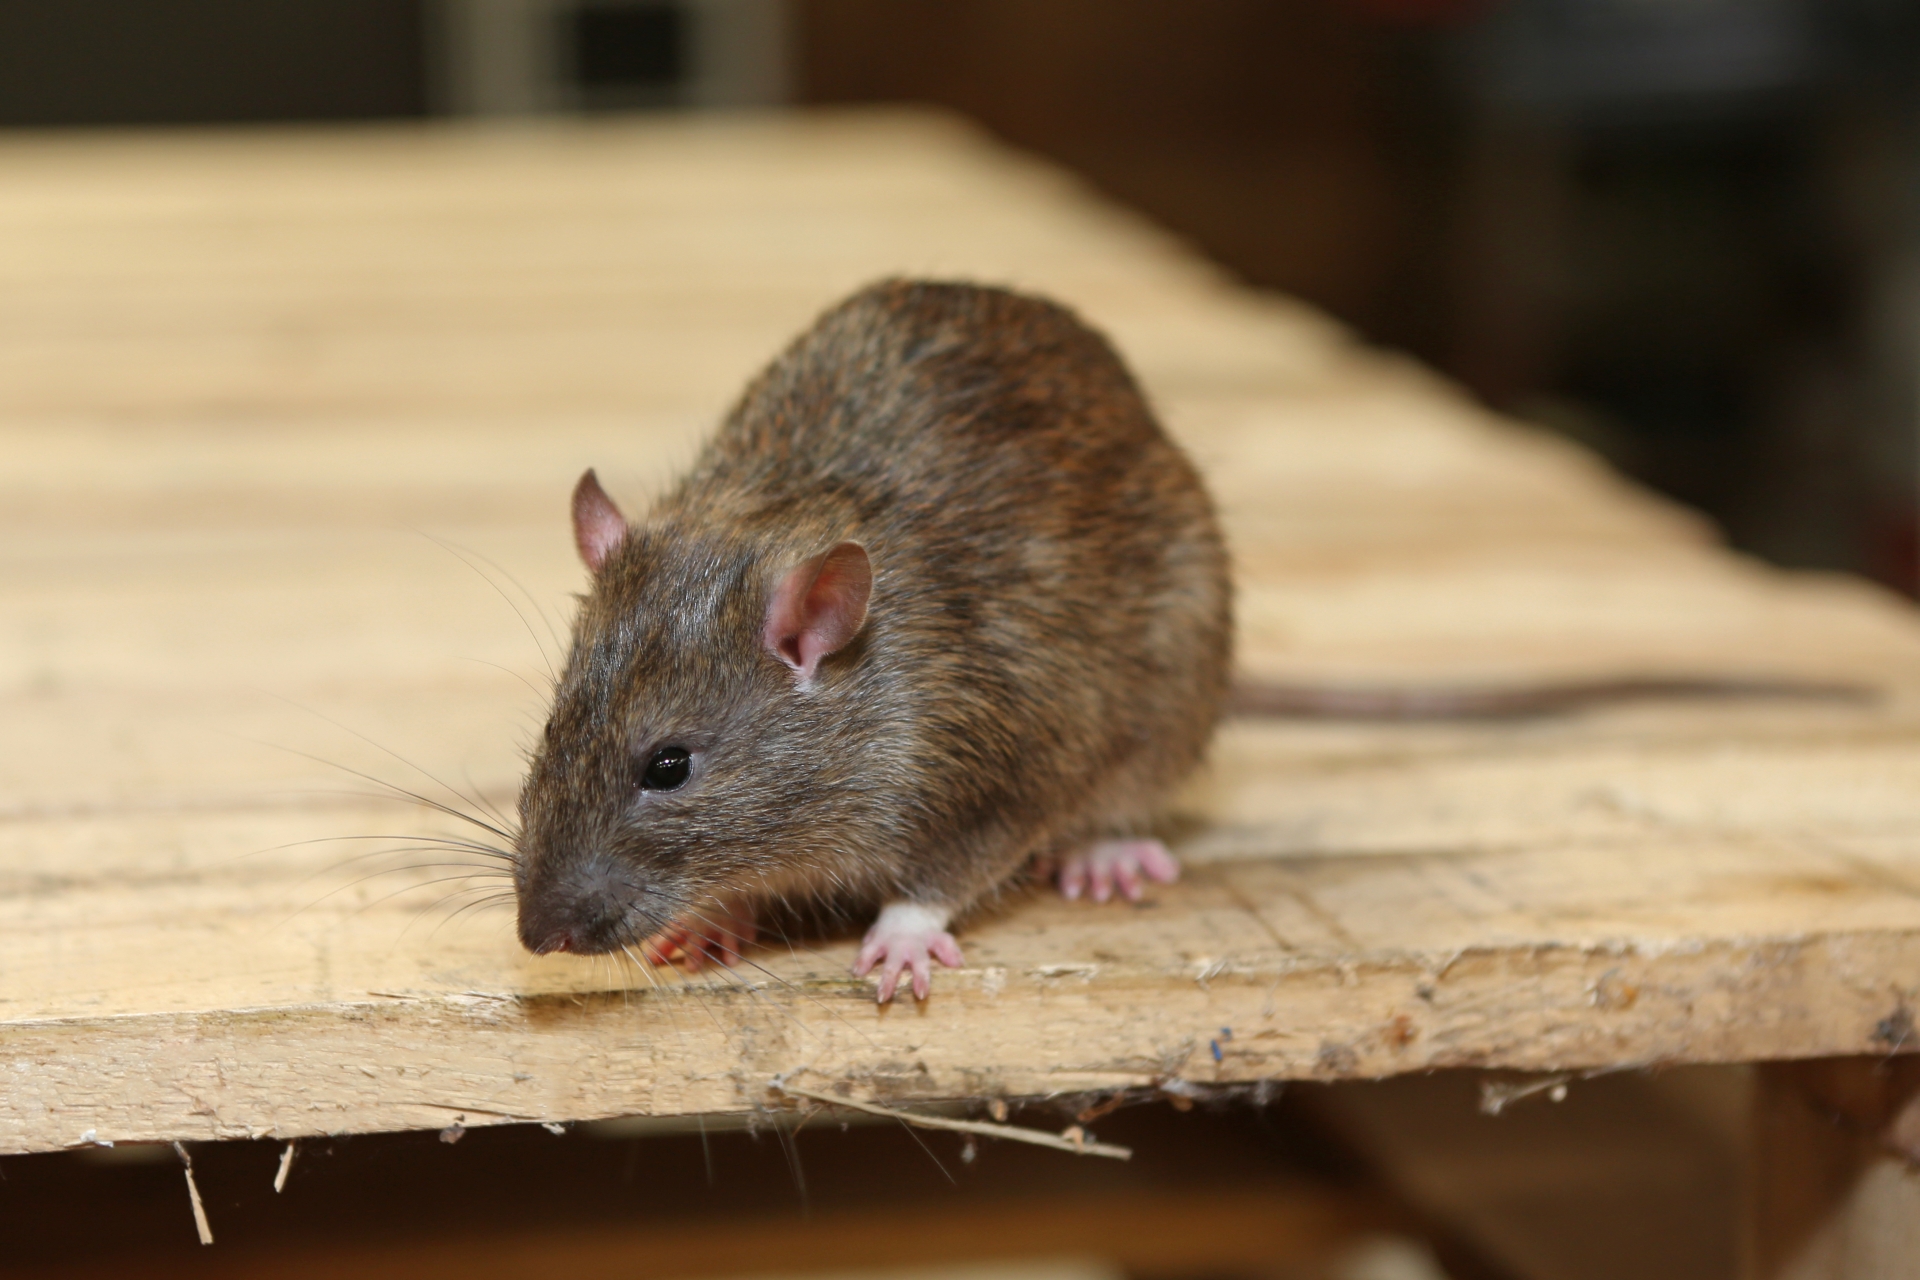 Rat Infestation, Pest Control in Garston, Leavesden, WD25. Call Now 020 8166 9746